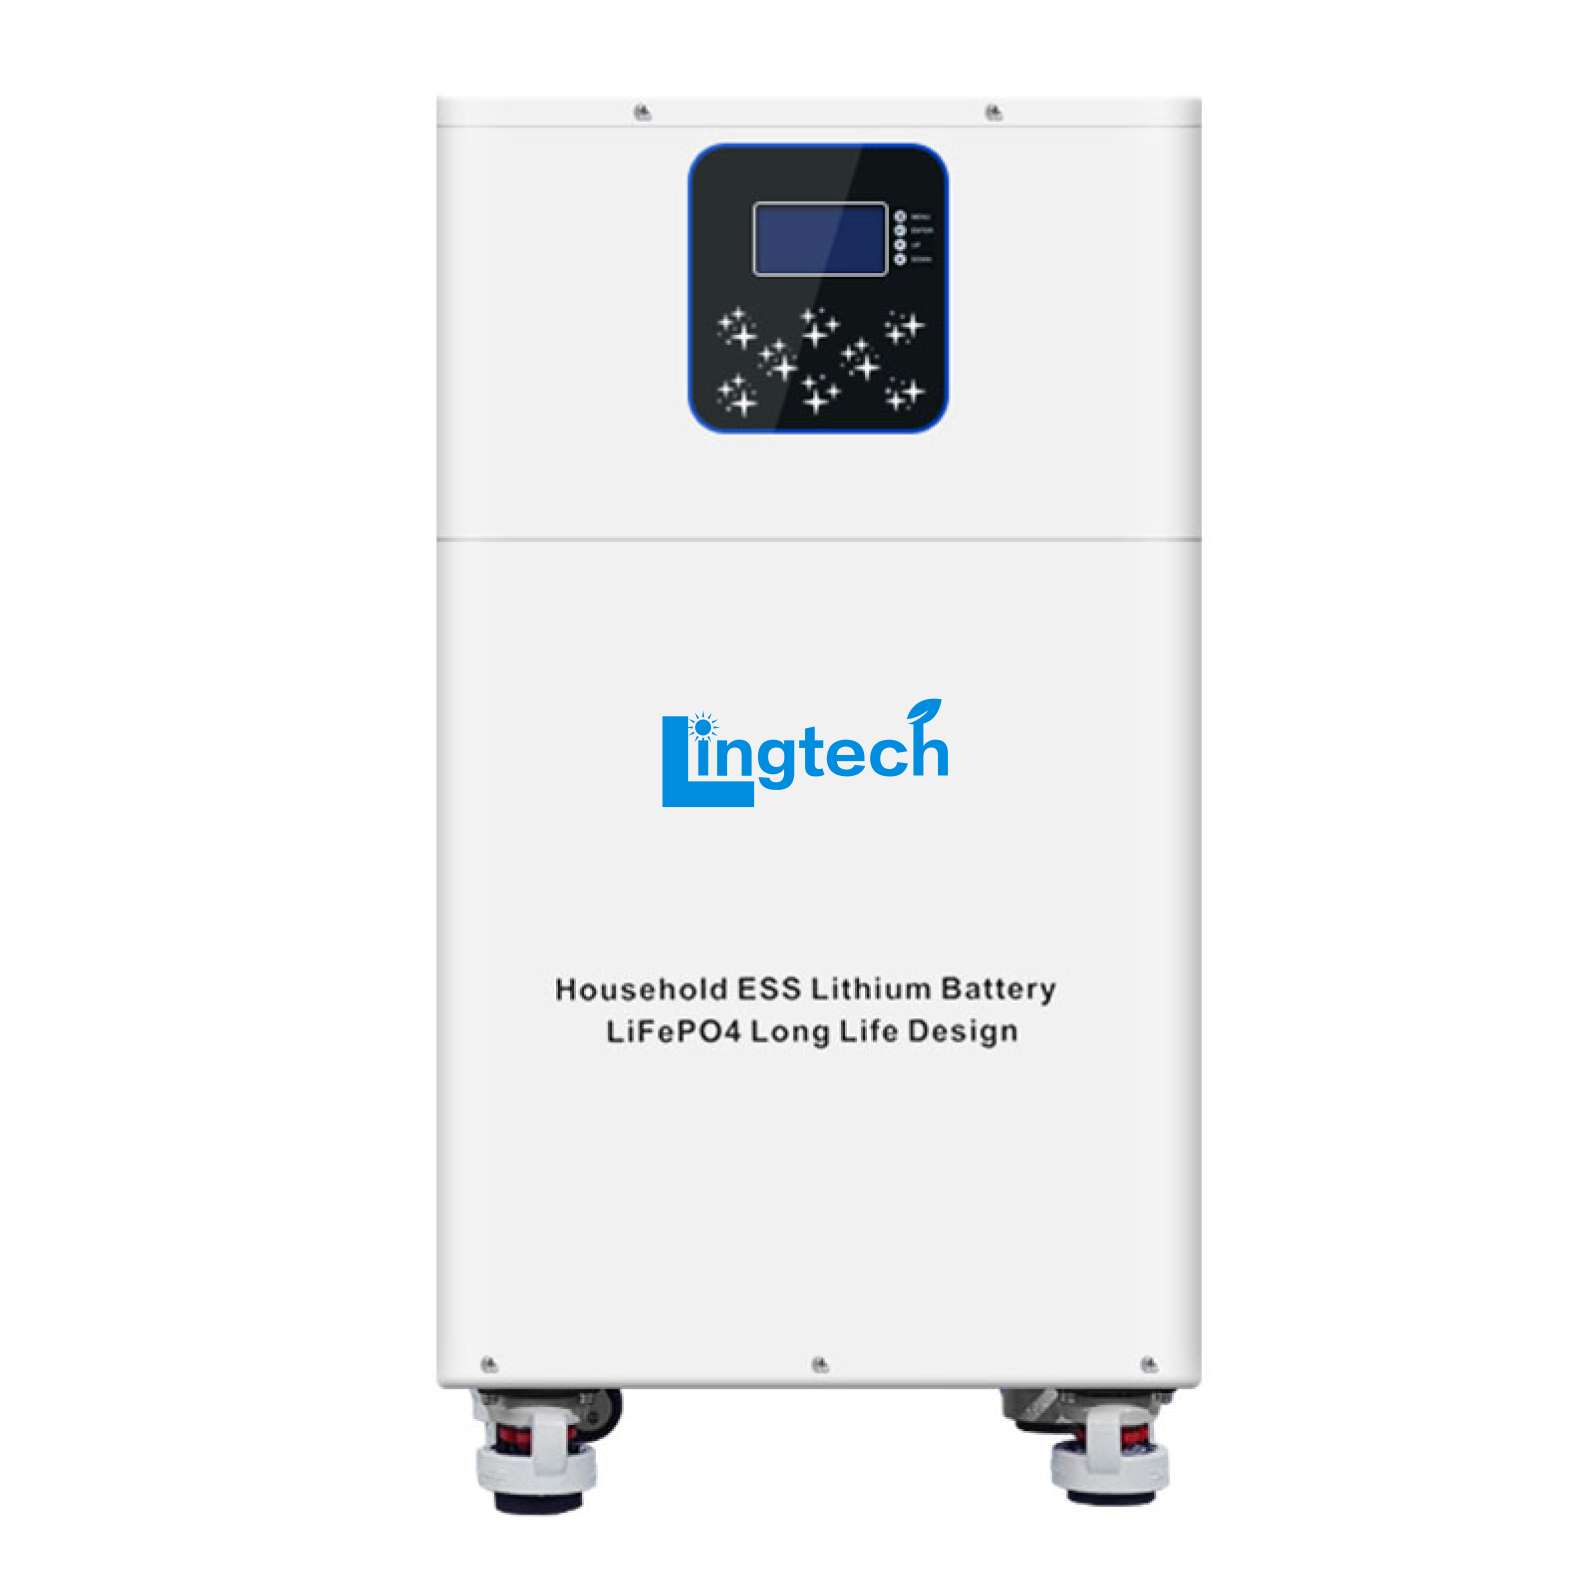 Lingtech 10kwh battery ESS with wheels